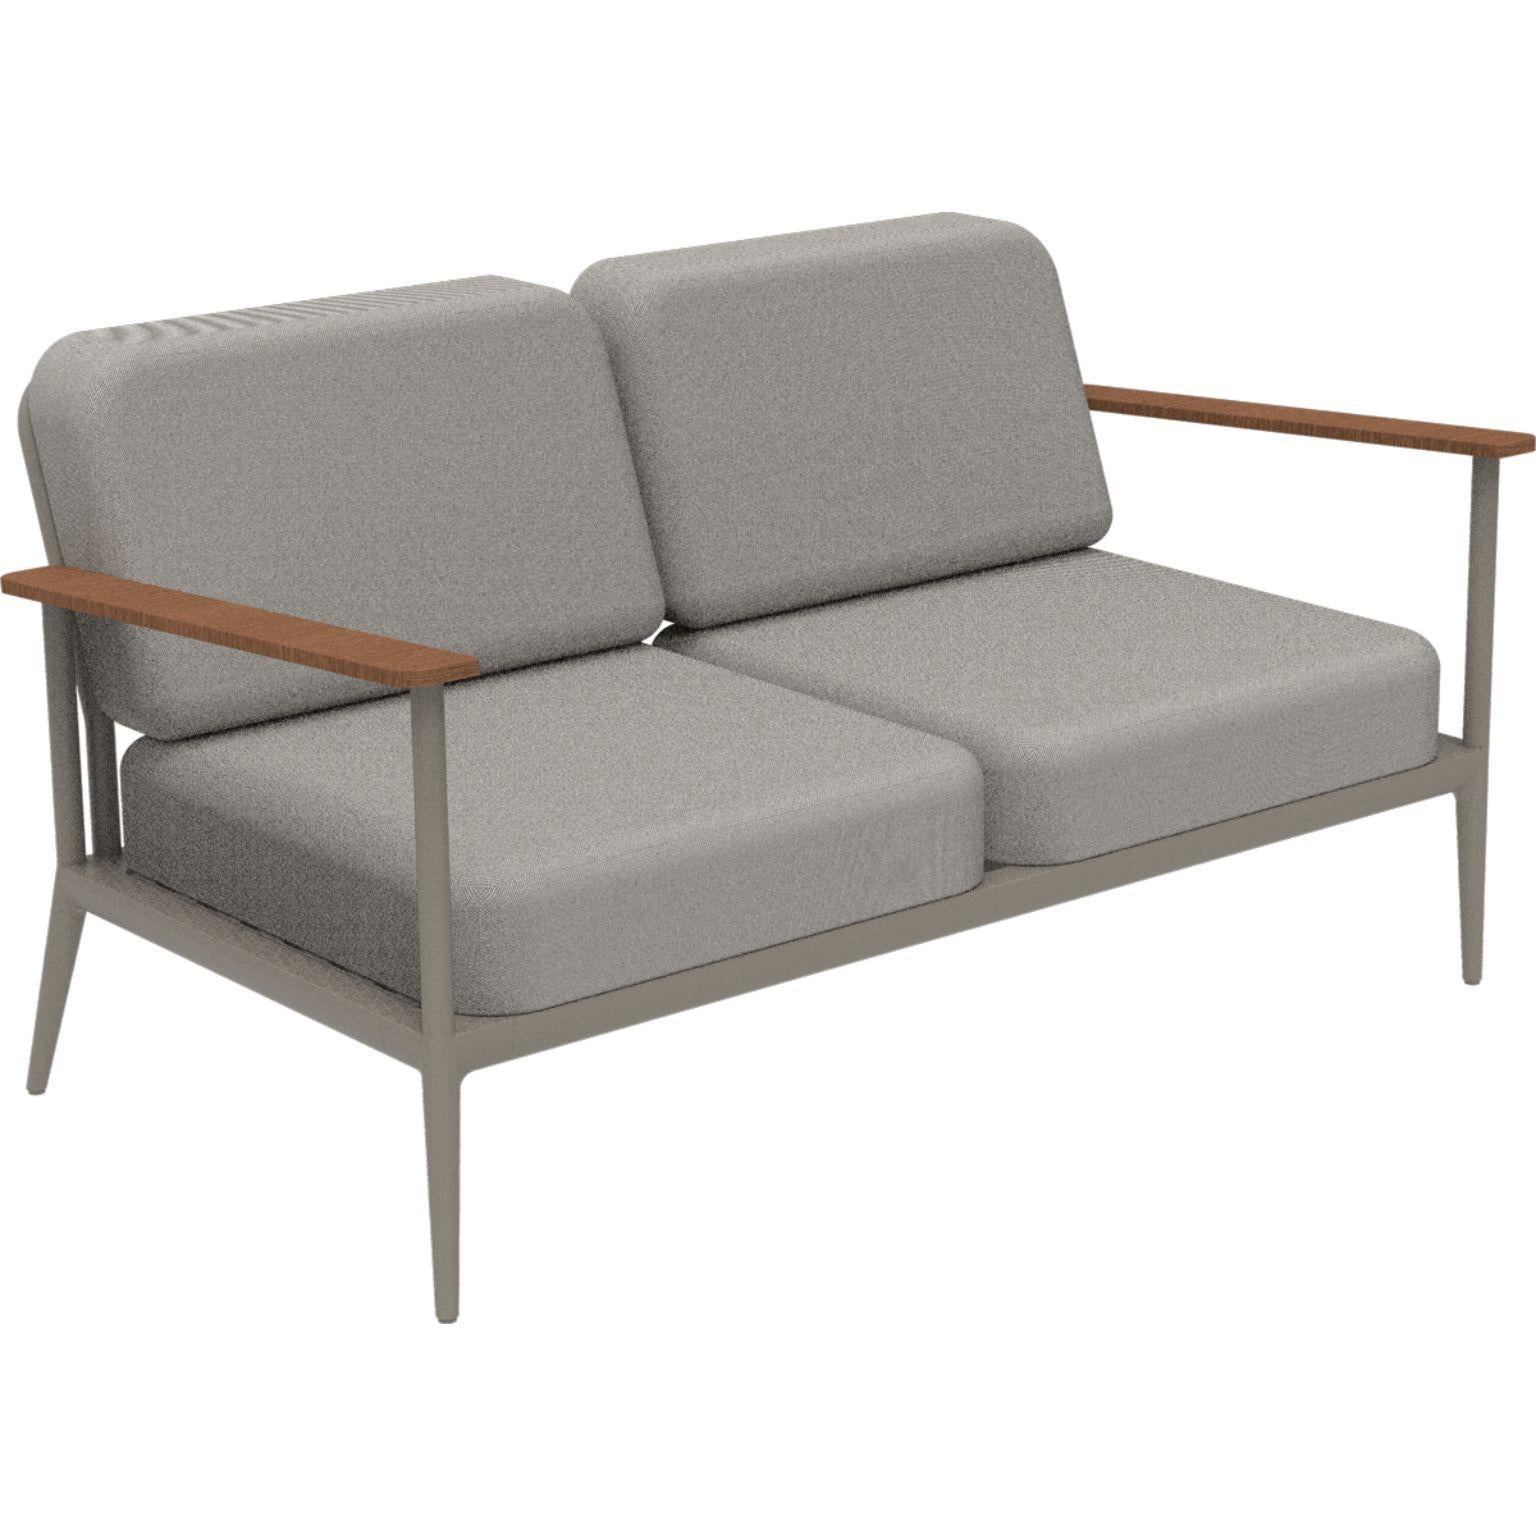 Nature cream sofa by MOWEE.
Dimensions: D85 x W151 x H81 cm (seat height 42 cm).
Material: aluminum, upholstery and Iroko Wood.
Weight: 32 kg.
Also available in different colors and finishes.

An unmistakable collection for its beauty and